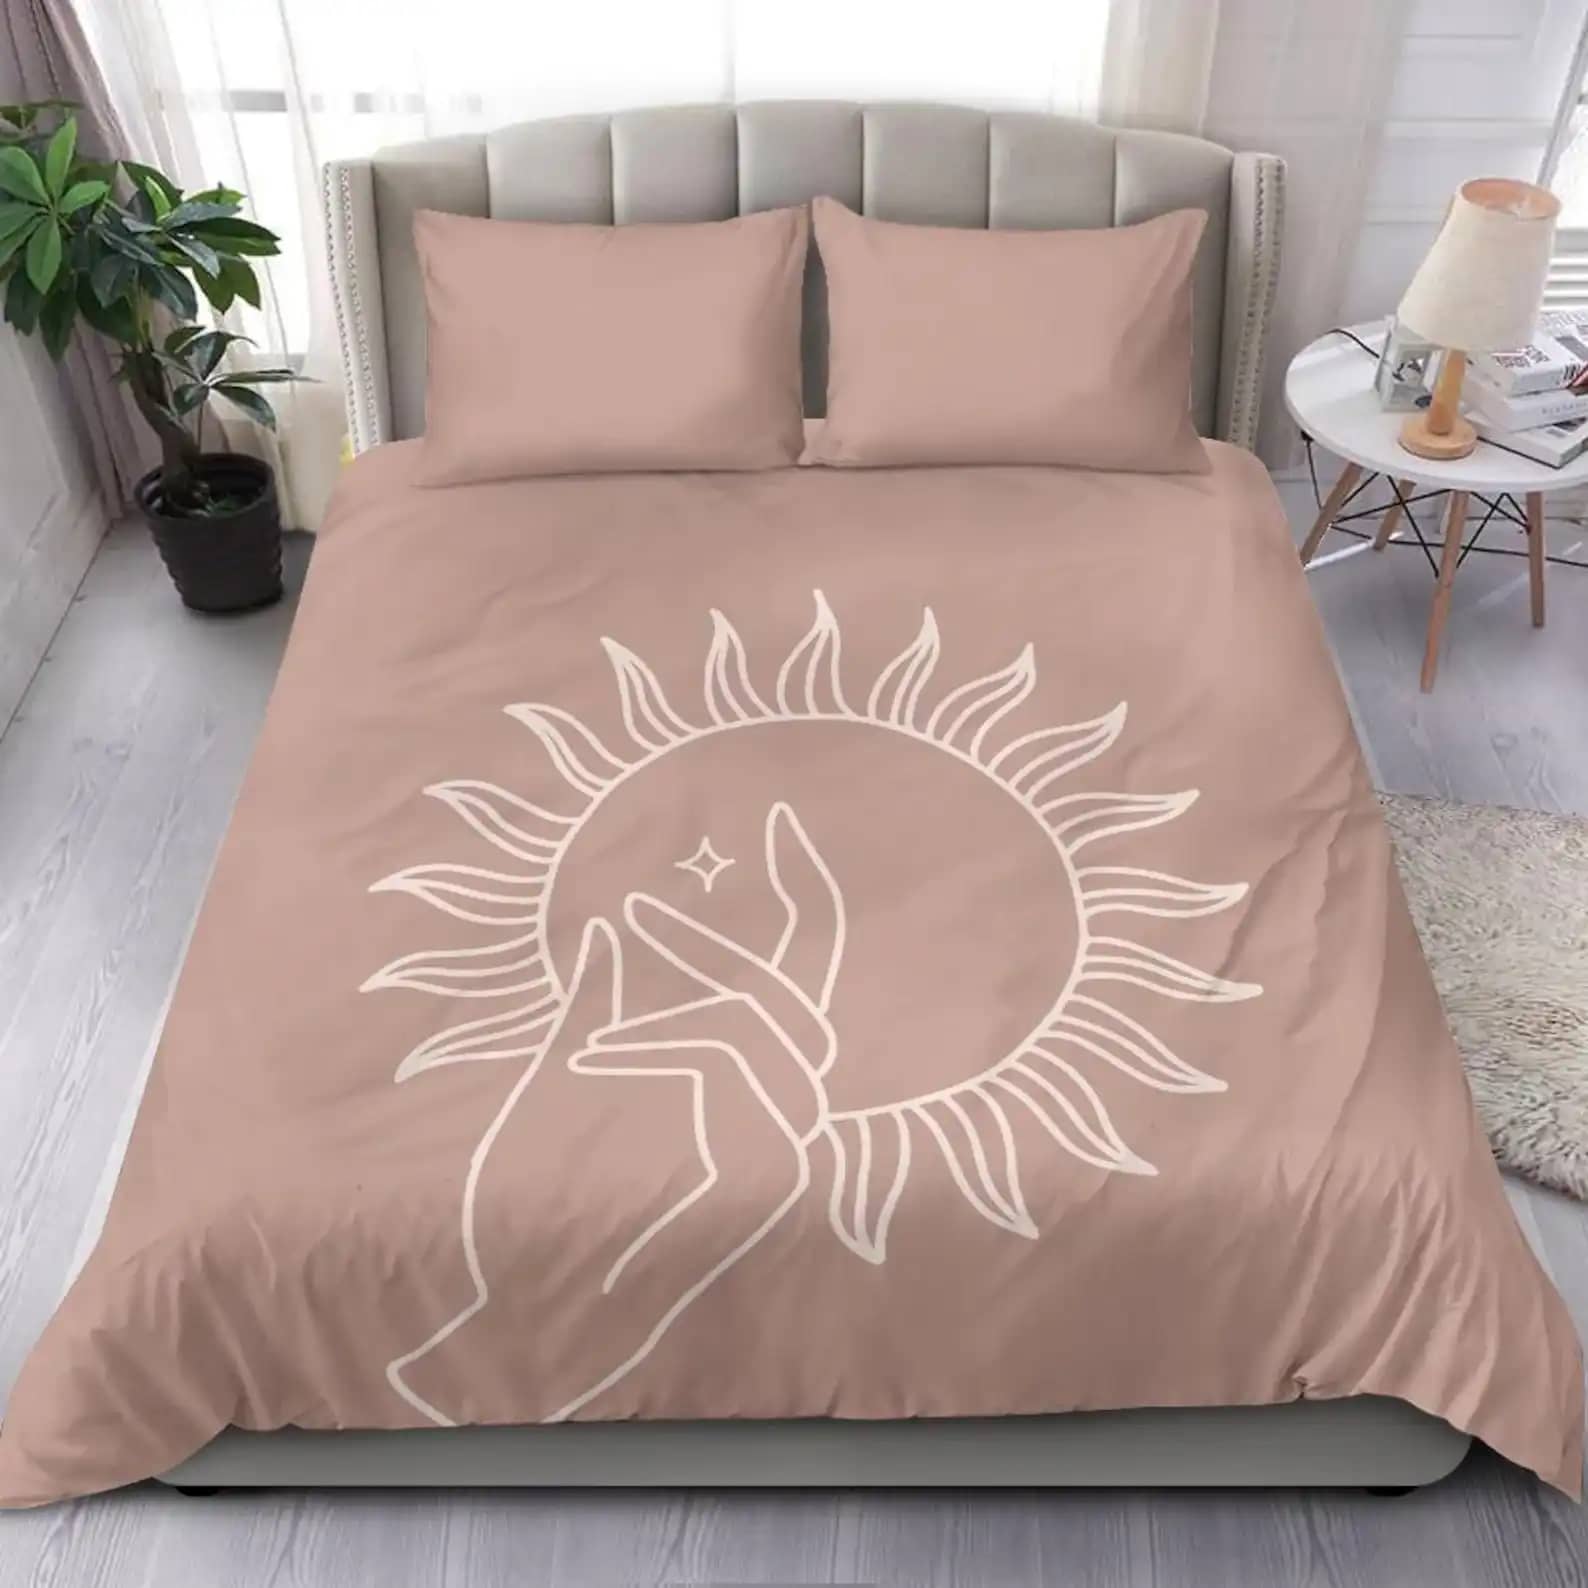 Chic Fancy Modern Sun Drawing On A Pink Beige Background Quilt Bedding Sets